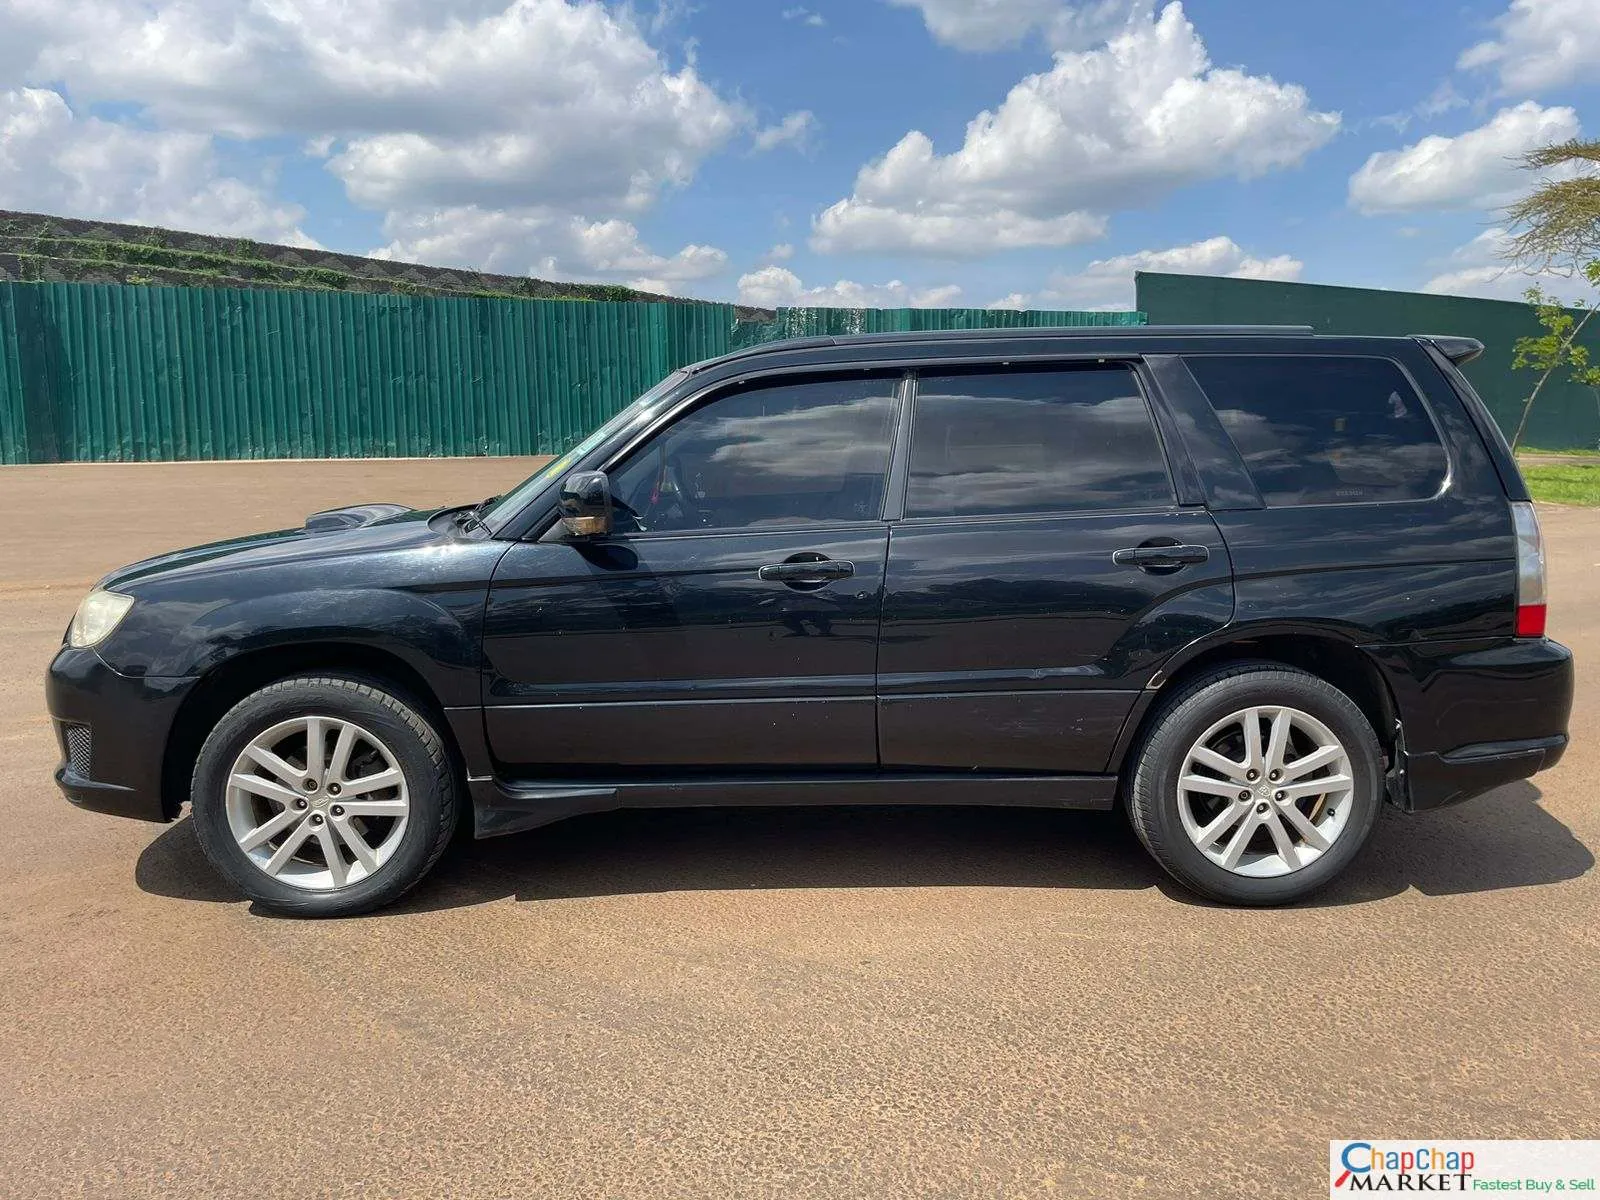 Subaru Forester TURBO CHARGED You Pay 30% deposit Trade in Ok EXCLUSIVE hire purchase installments for sale in kenya